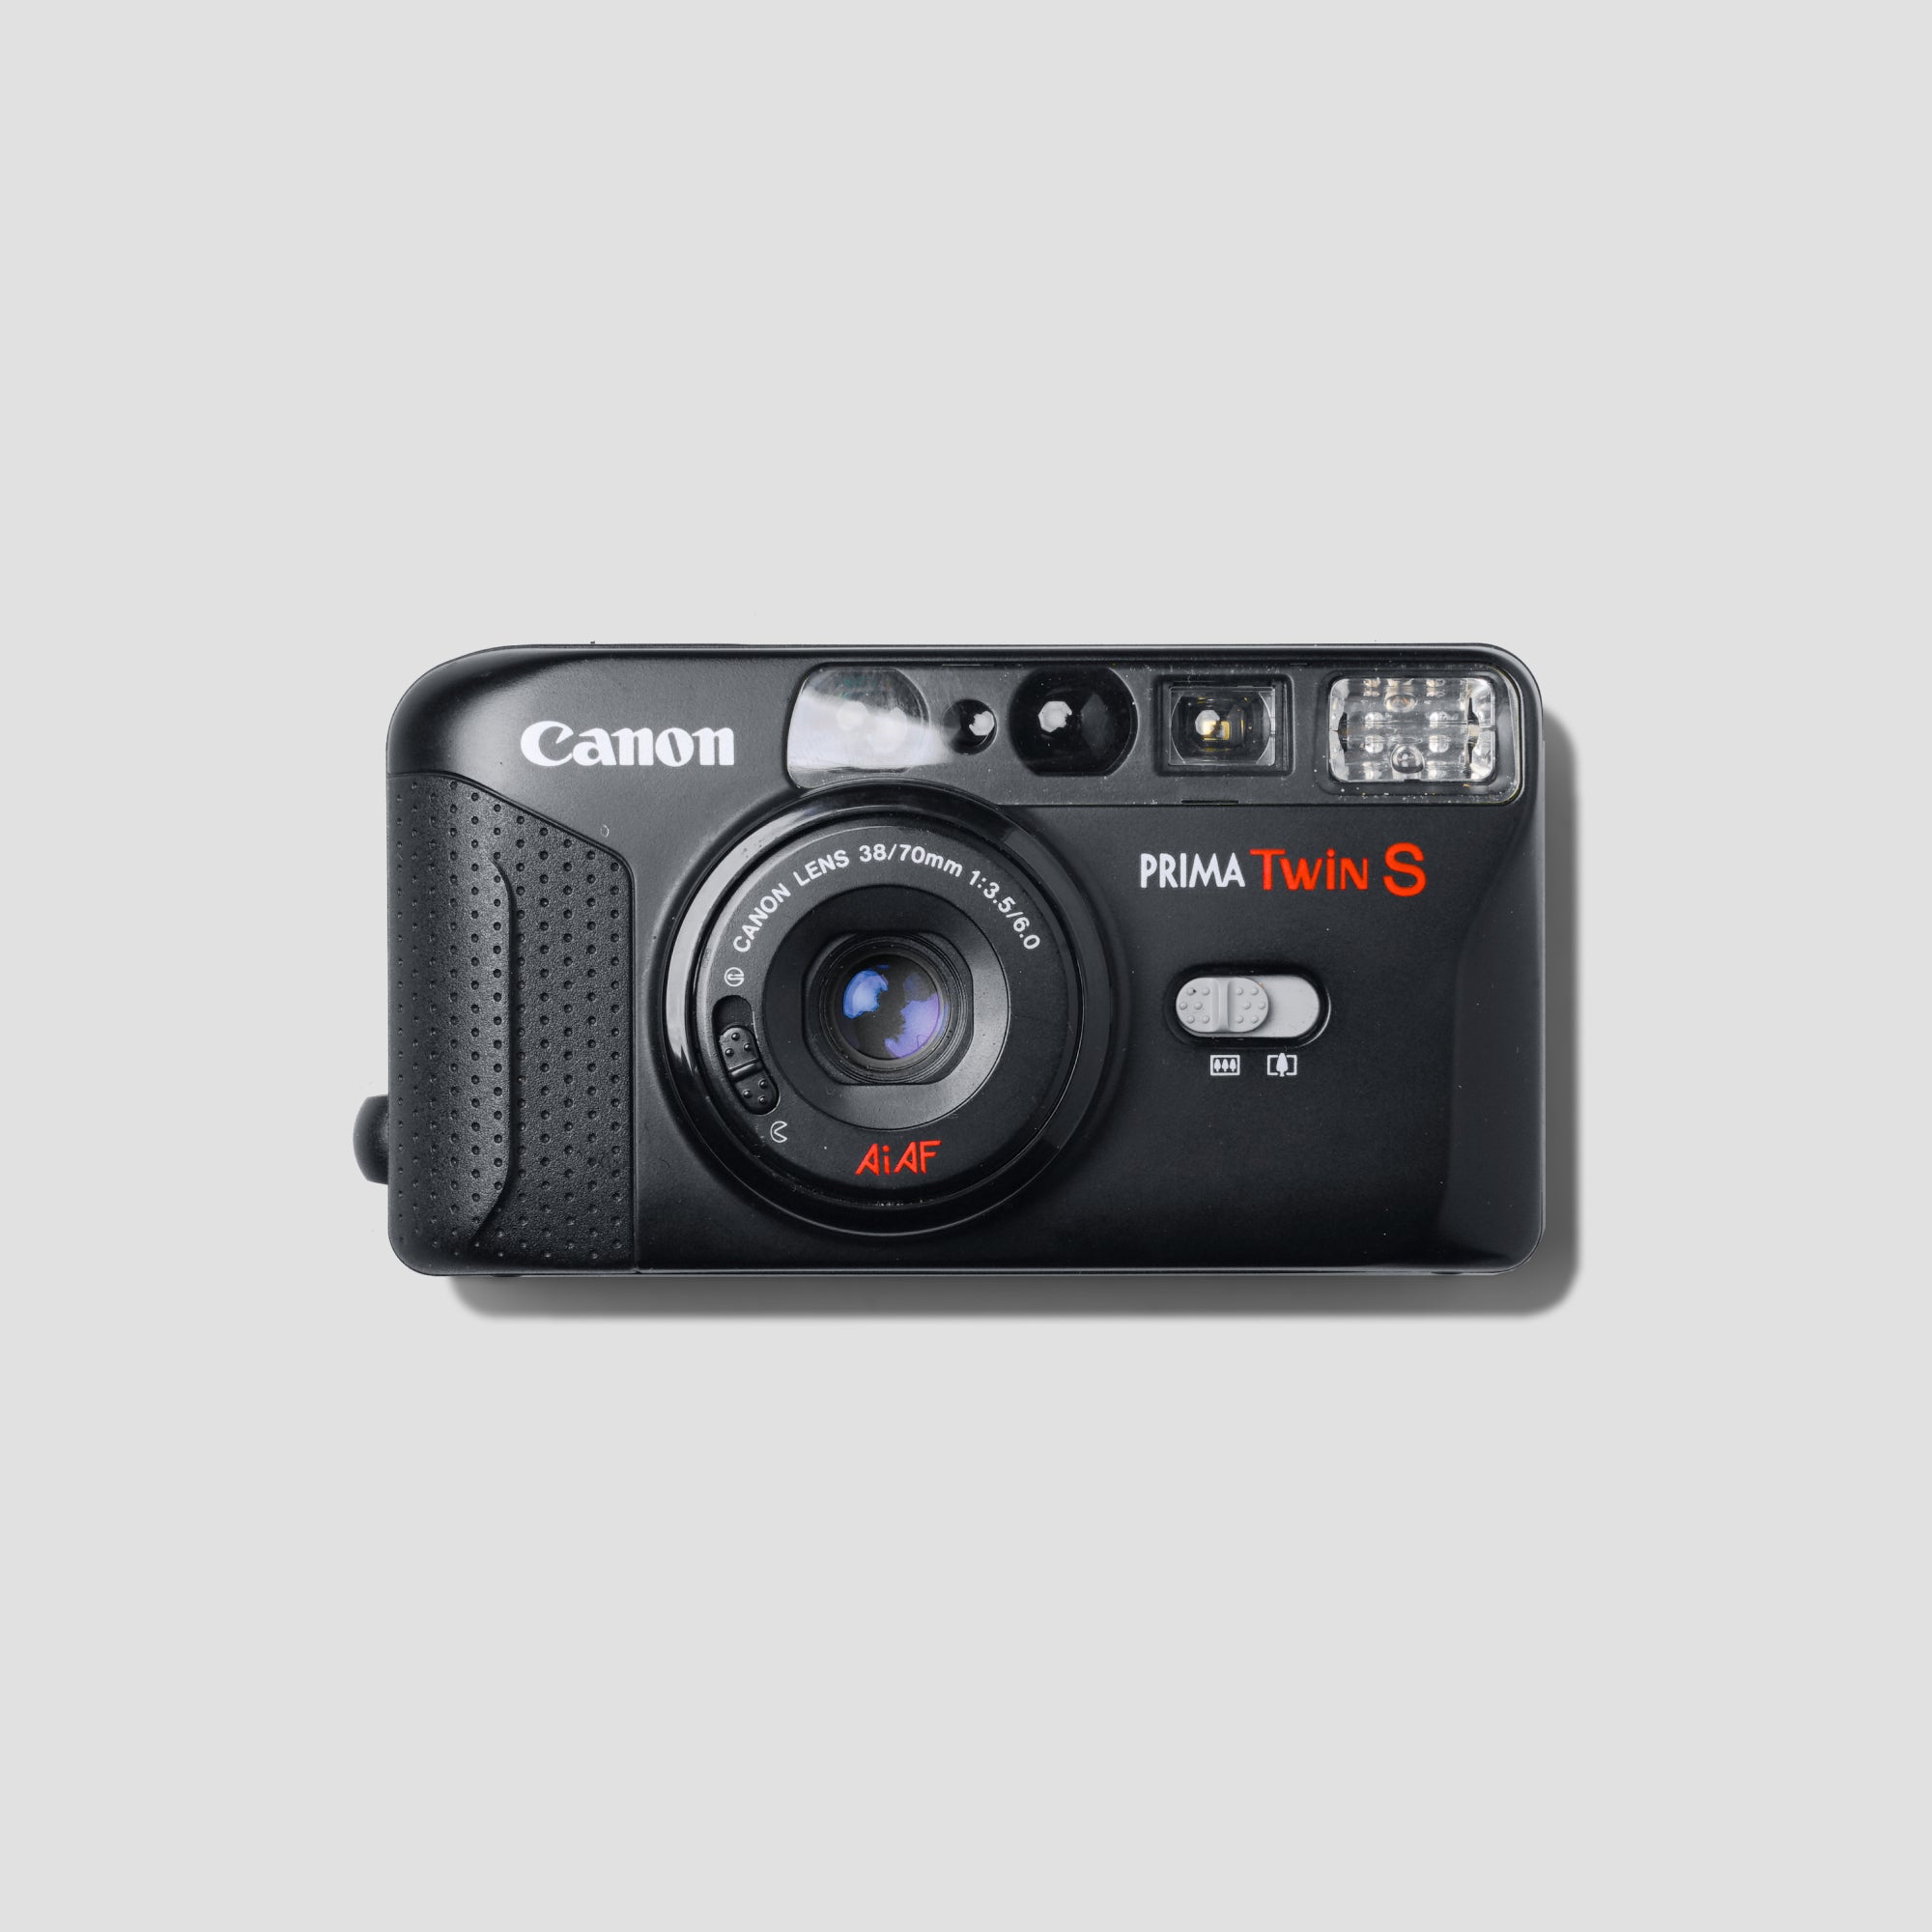 Buy Canon Prima Twin S now at Analogue Amsterdam